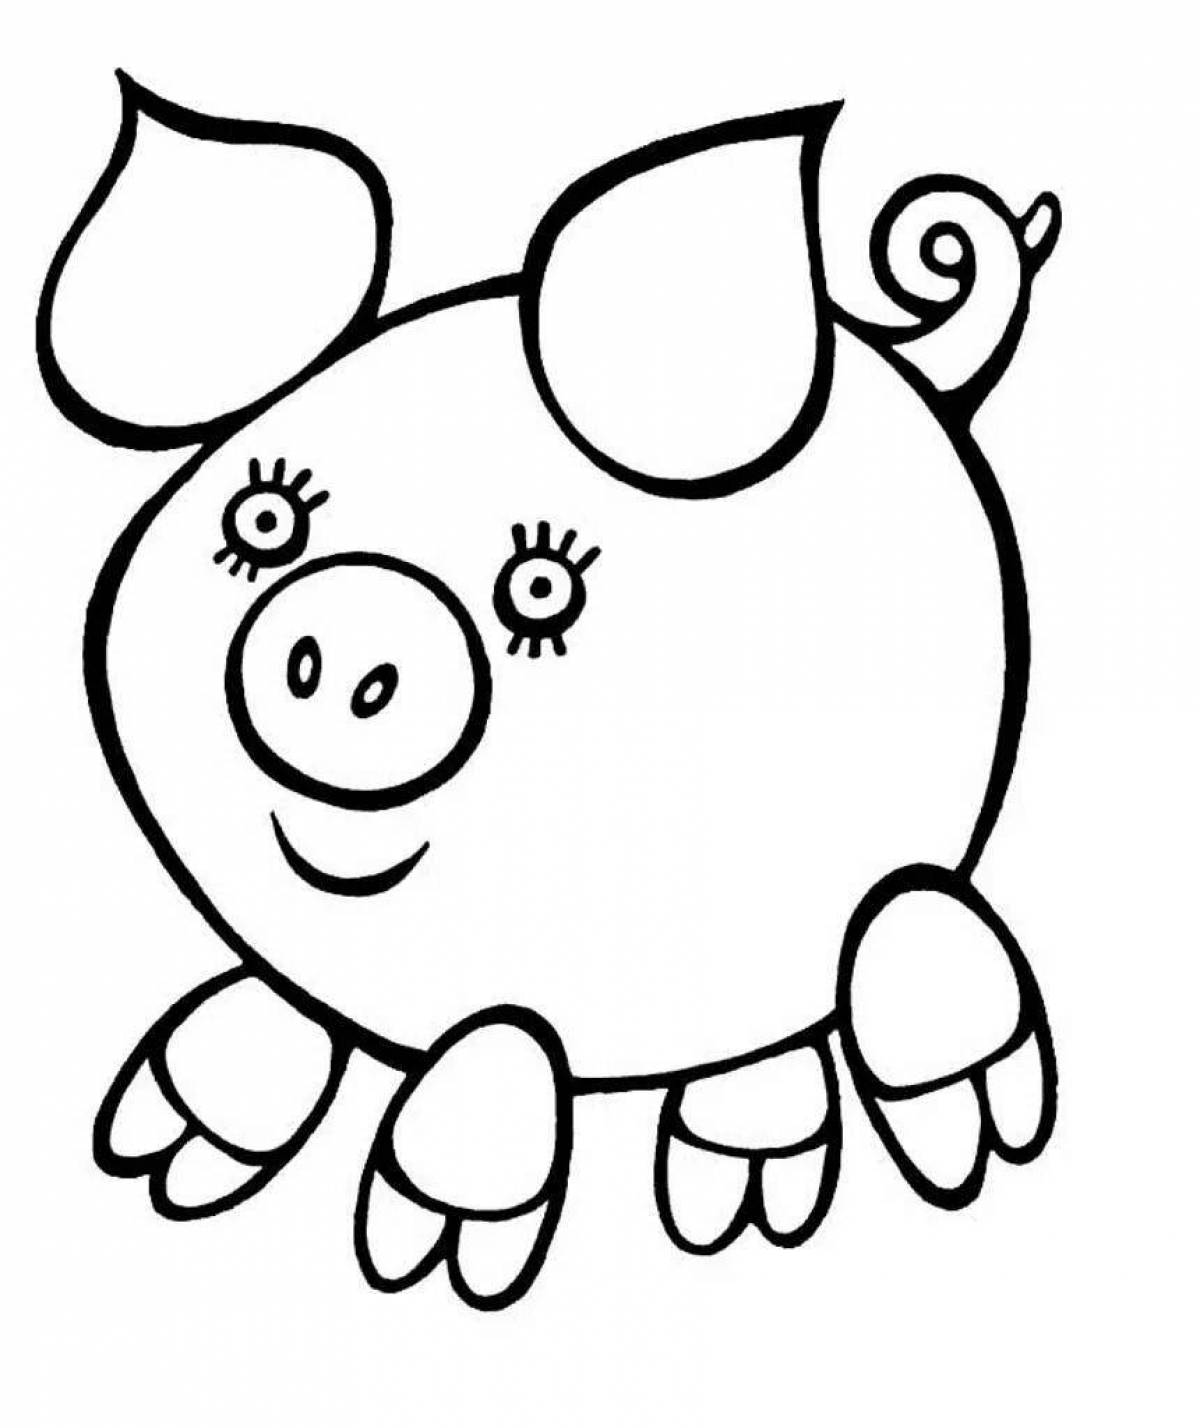 Cute pig coloring book for kids